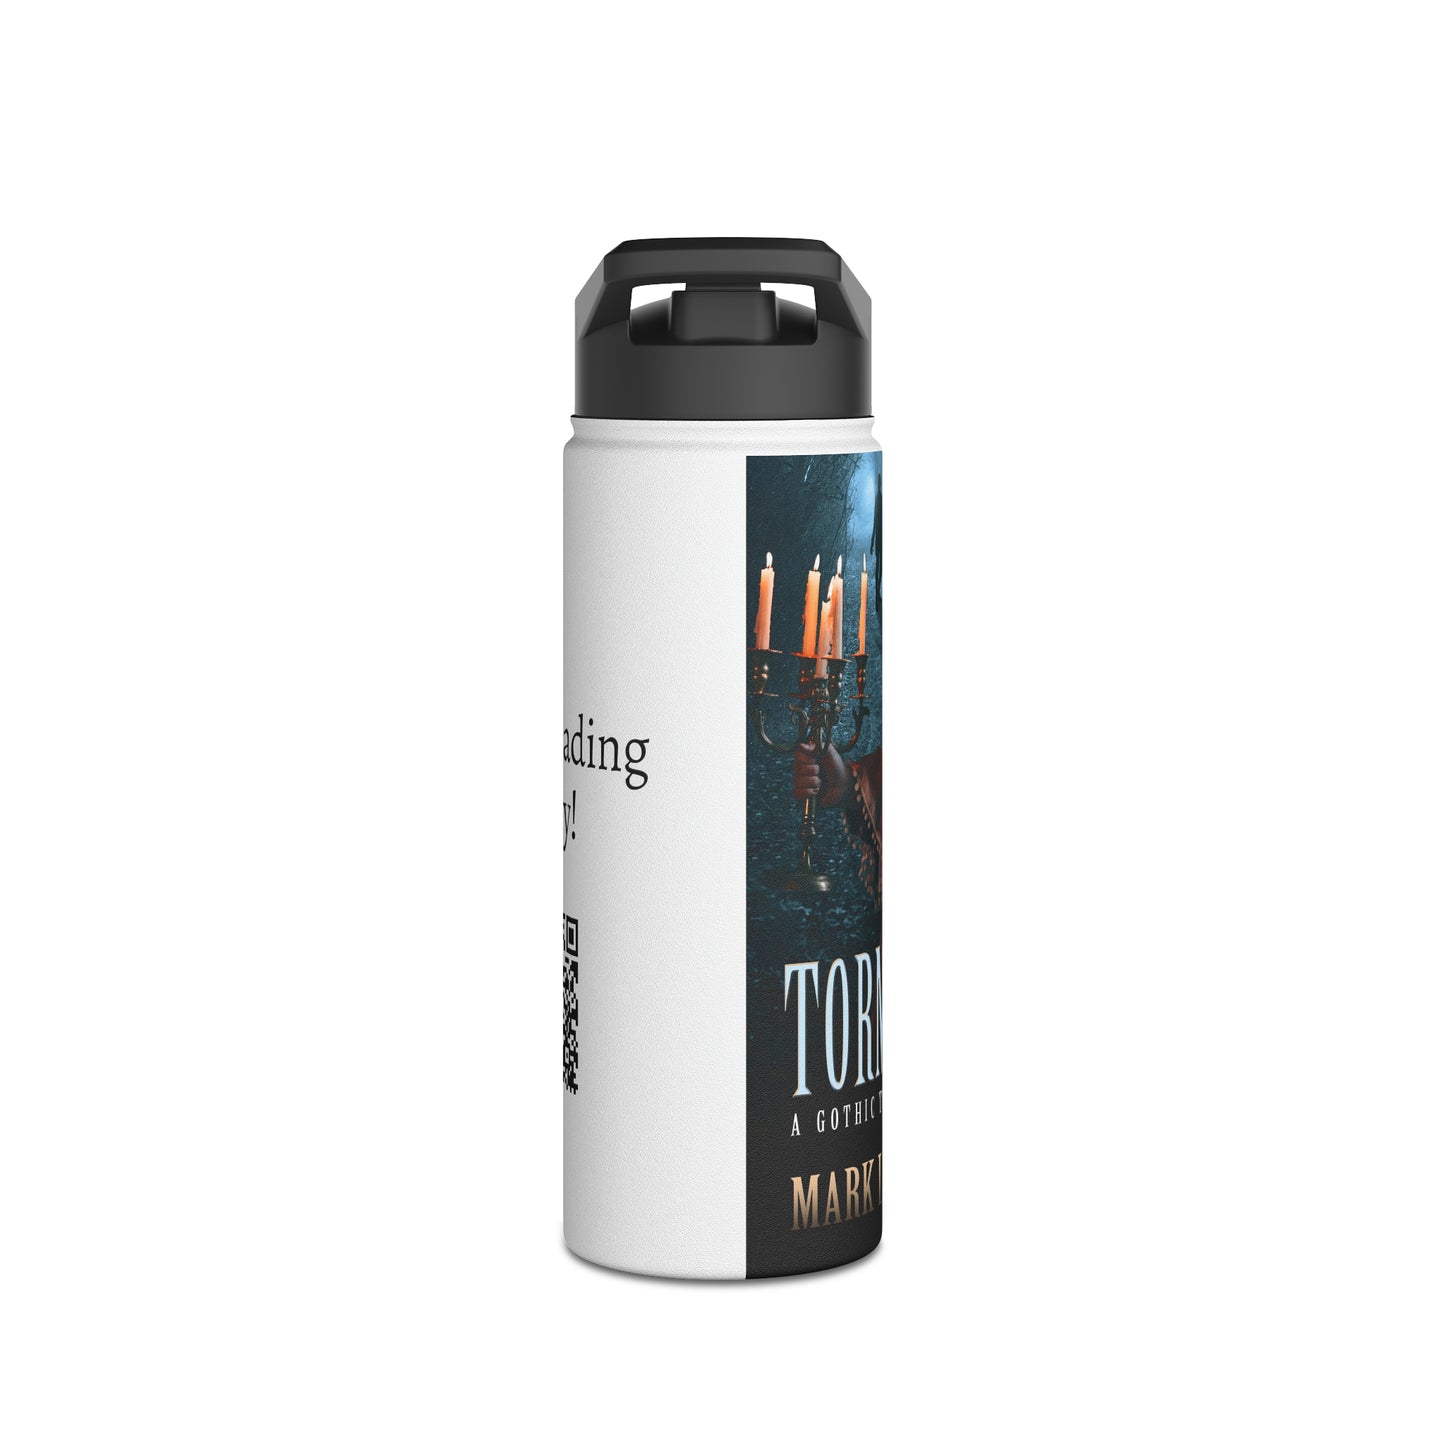 Tormented - Stainless Steel Water Bottle